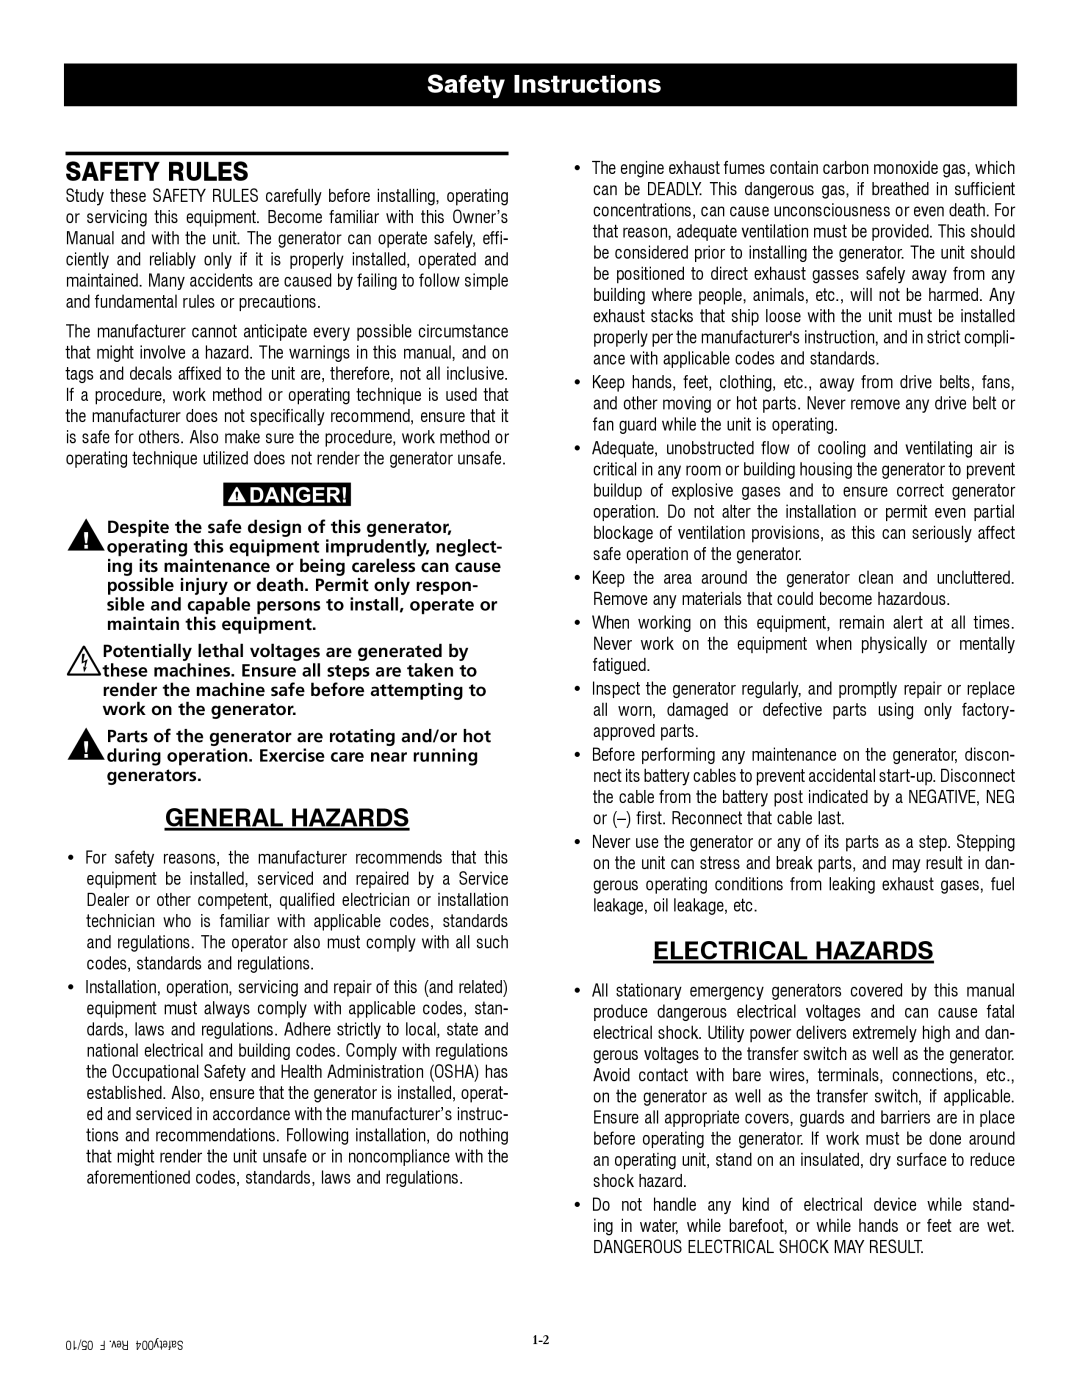 Generac QT04524ANSX owner manual Safety Rules, General Hazards, Electrical Hazards, Safety Instructions 